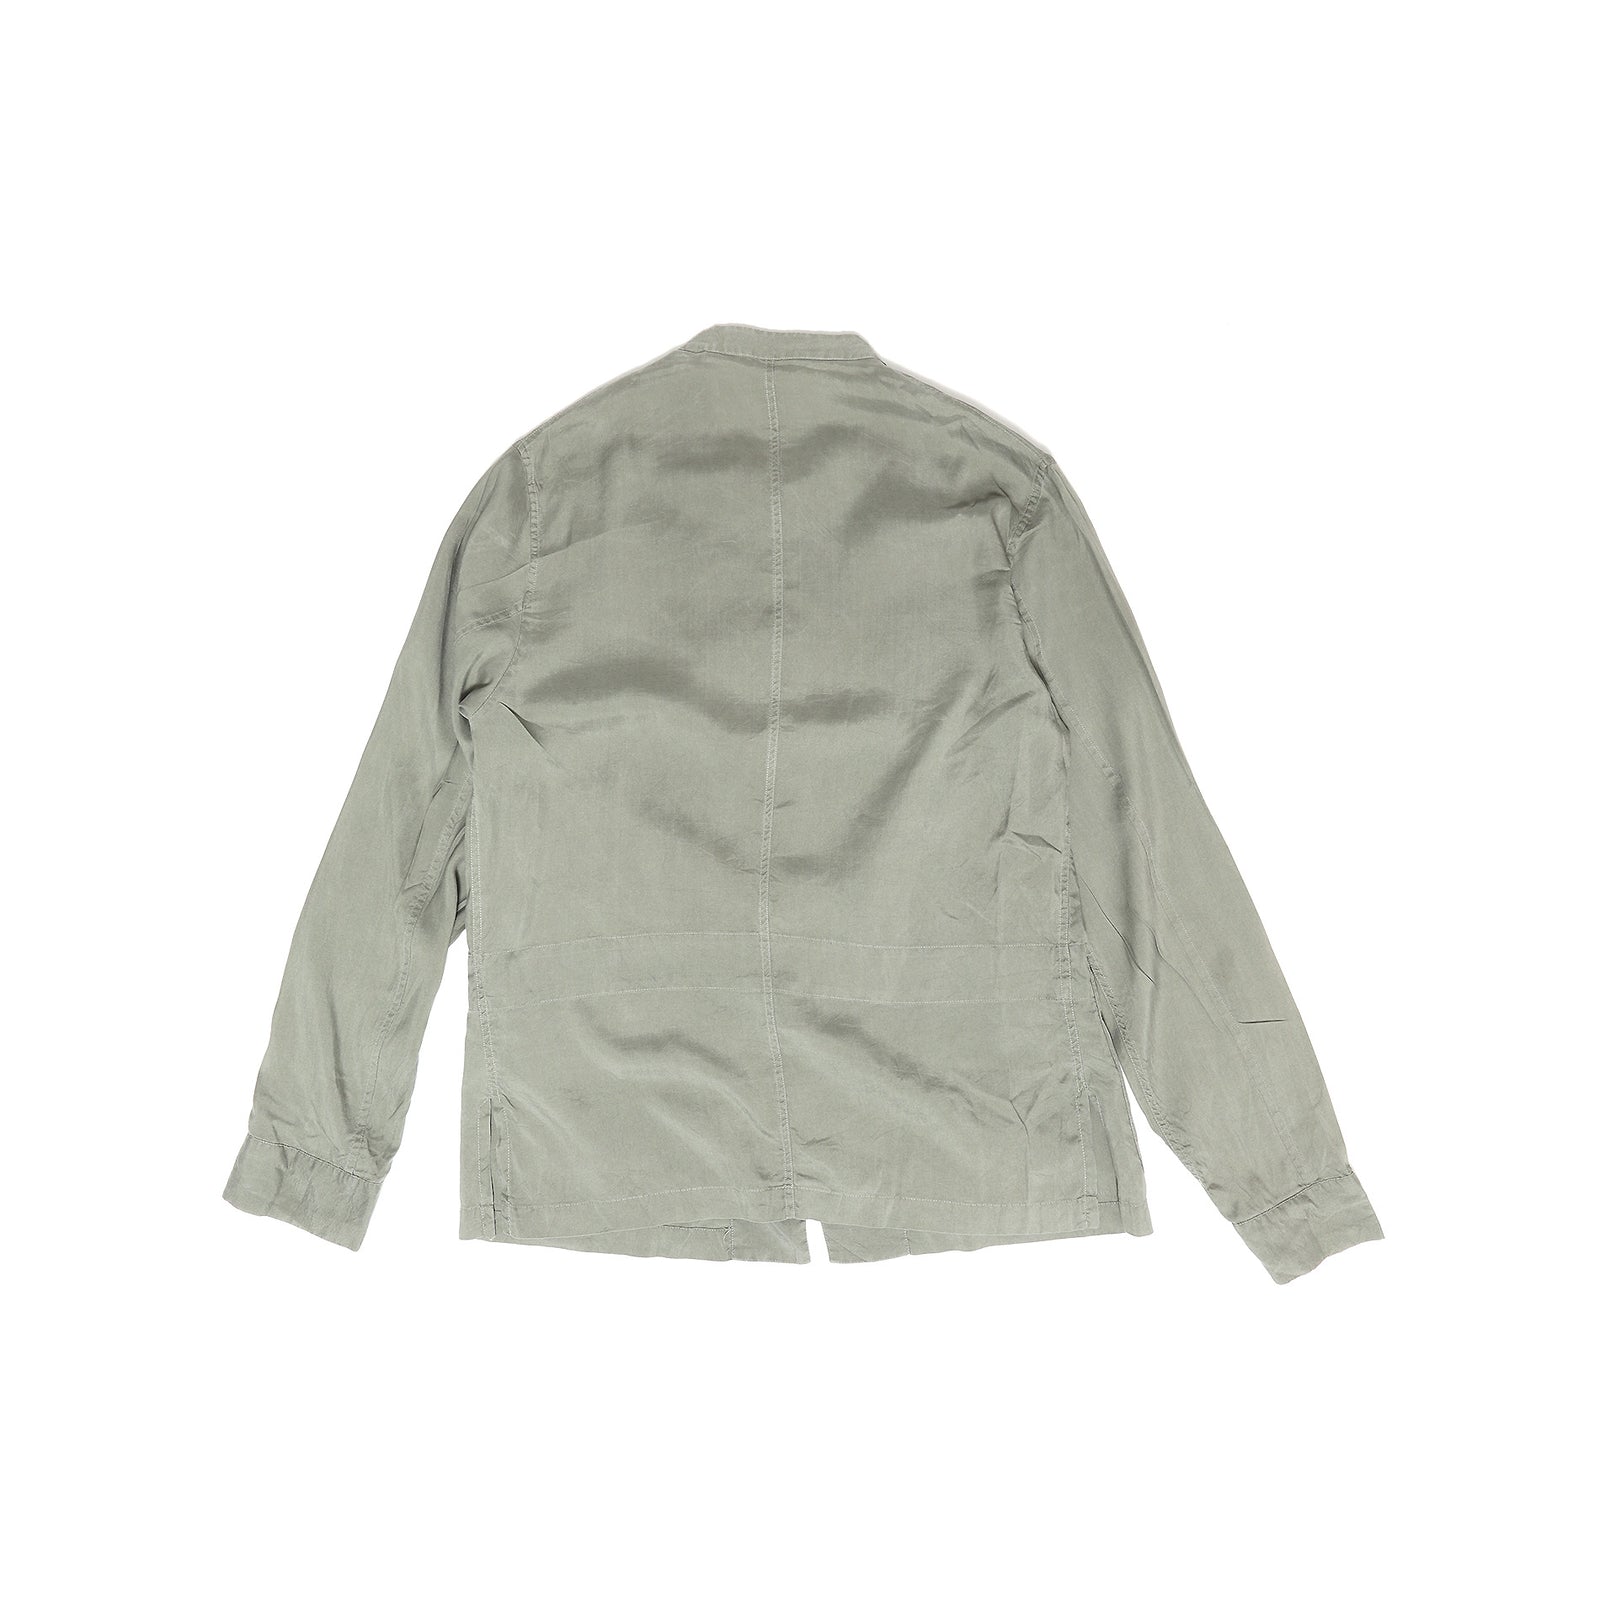 Louis Vuitton SS16 Terry Cloth Towelling Sweater - Ākaibu Store